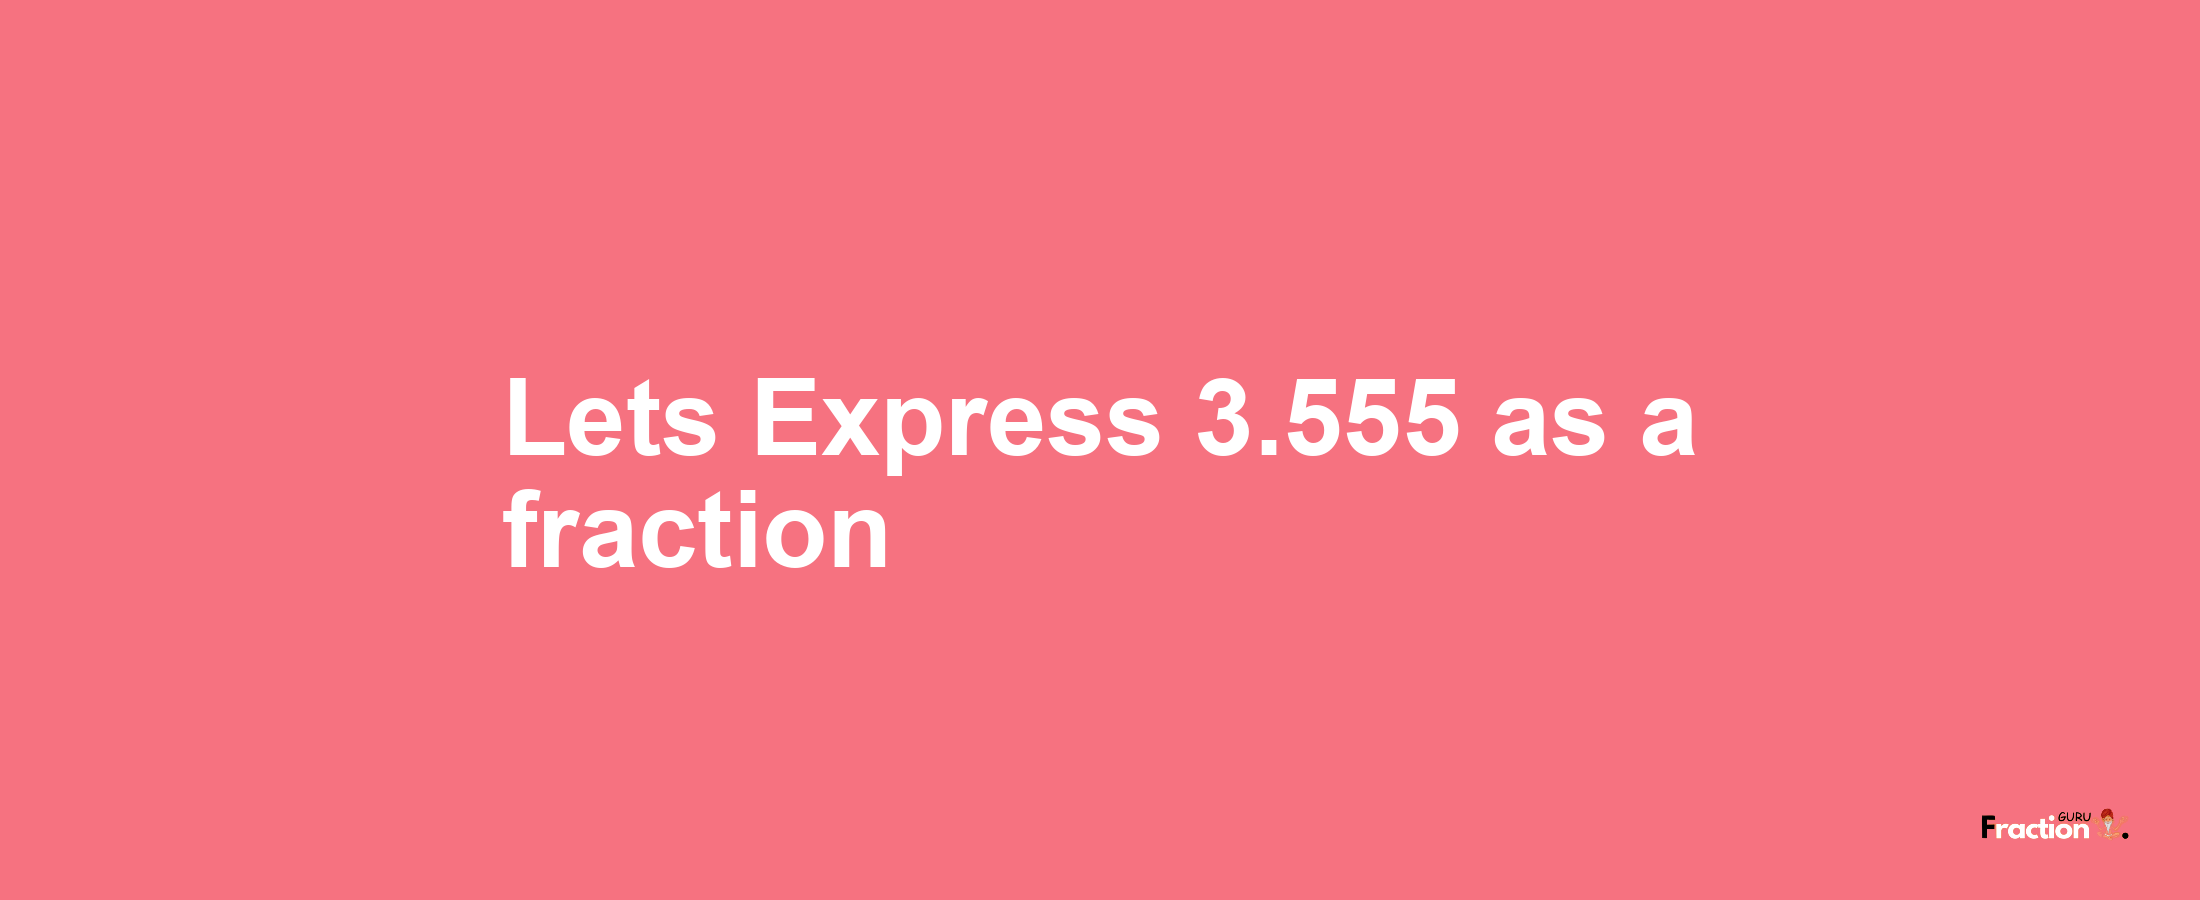 Lets Express 3.555 as afraction